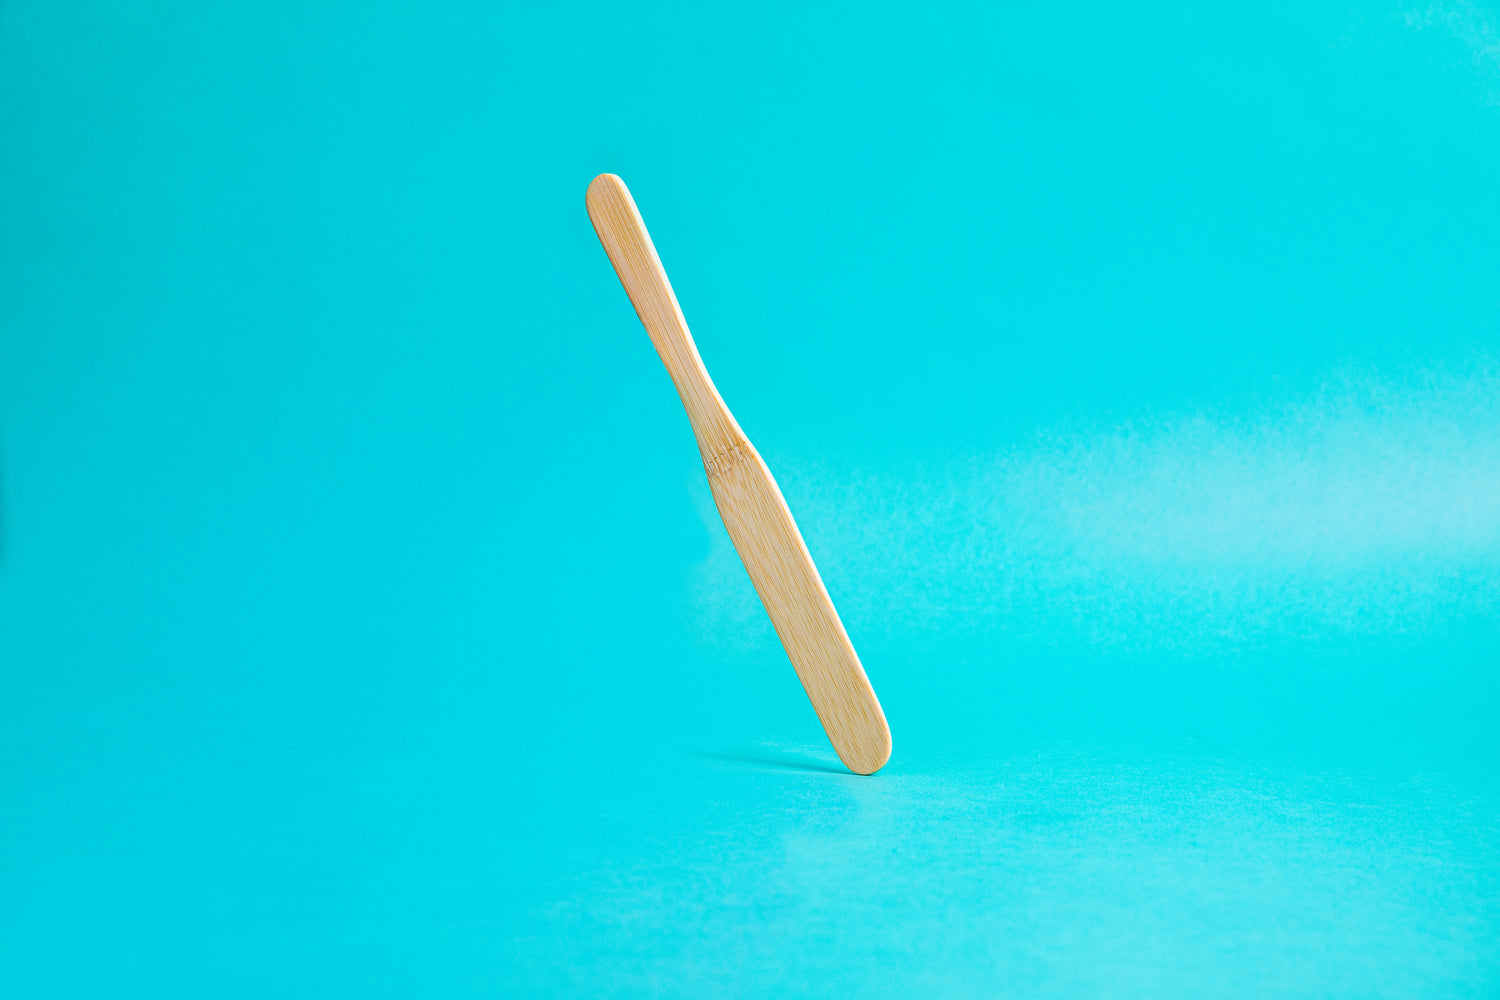 Flat, smooth, bamboo stirring stick with rounded edges, tapered between the handle and stirring portion, and set against a blue background. This item is remniscent in shape to a tongue depressor and works great for evenly stirring coffee grounds.